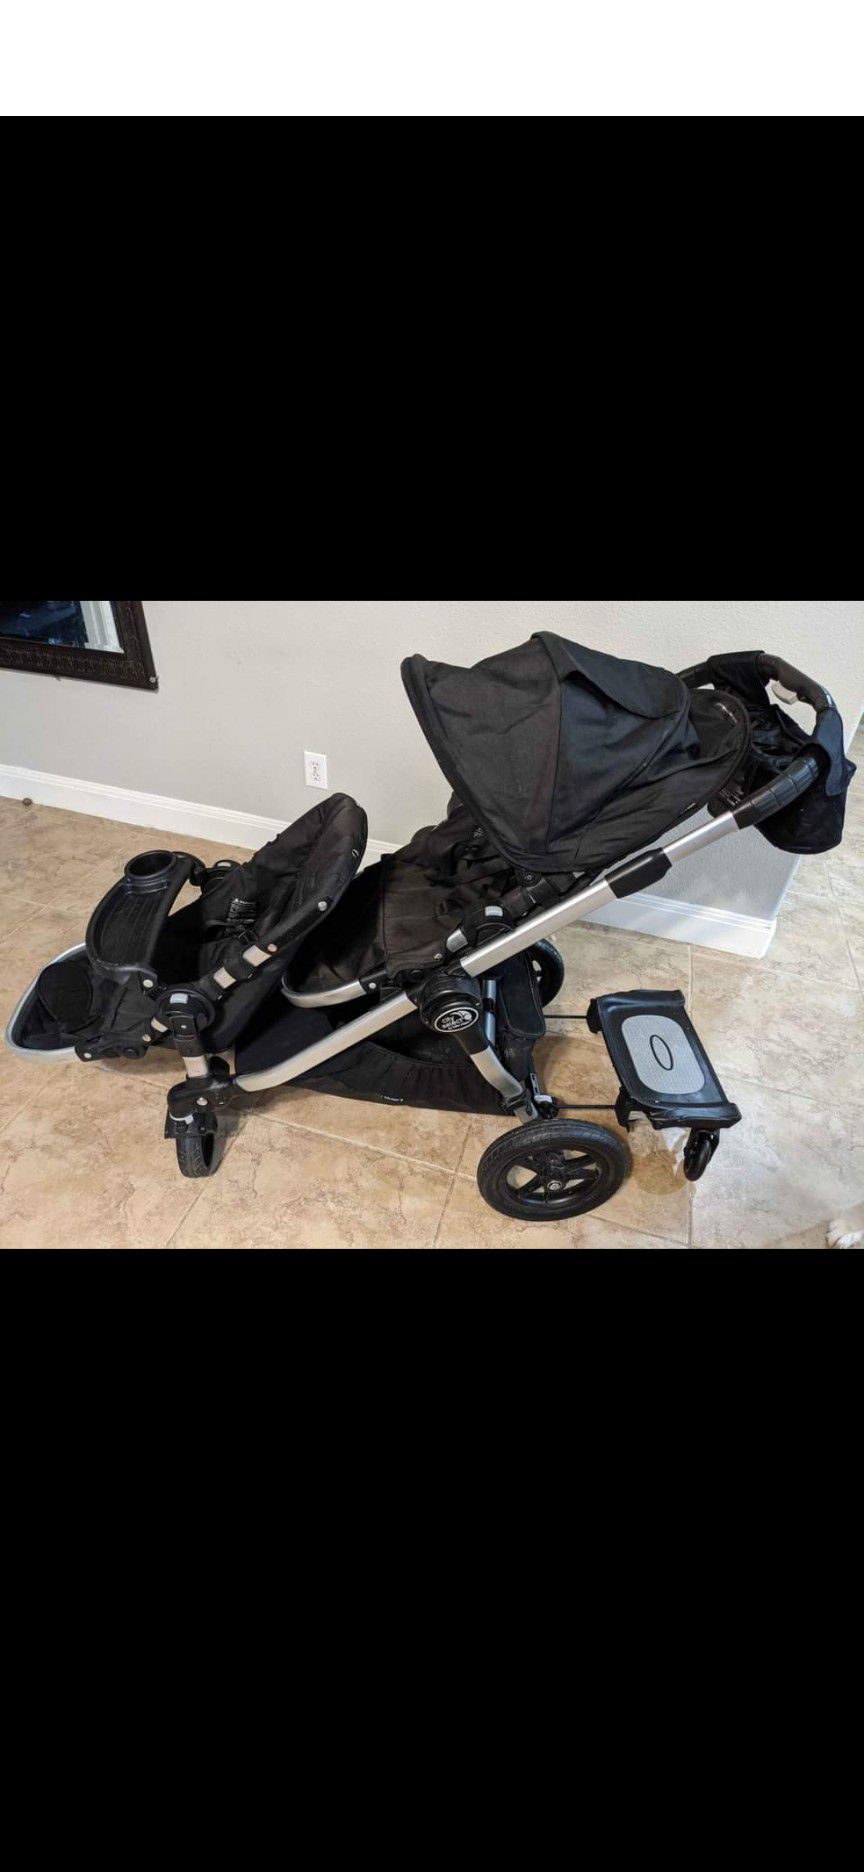 Baby city select double with multiple accessories for Sale in Oak Point, OfferUp